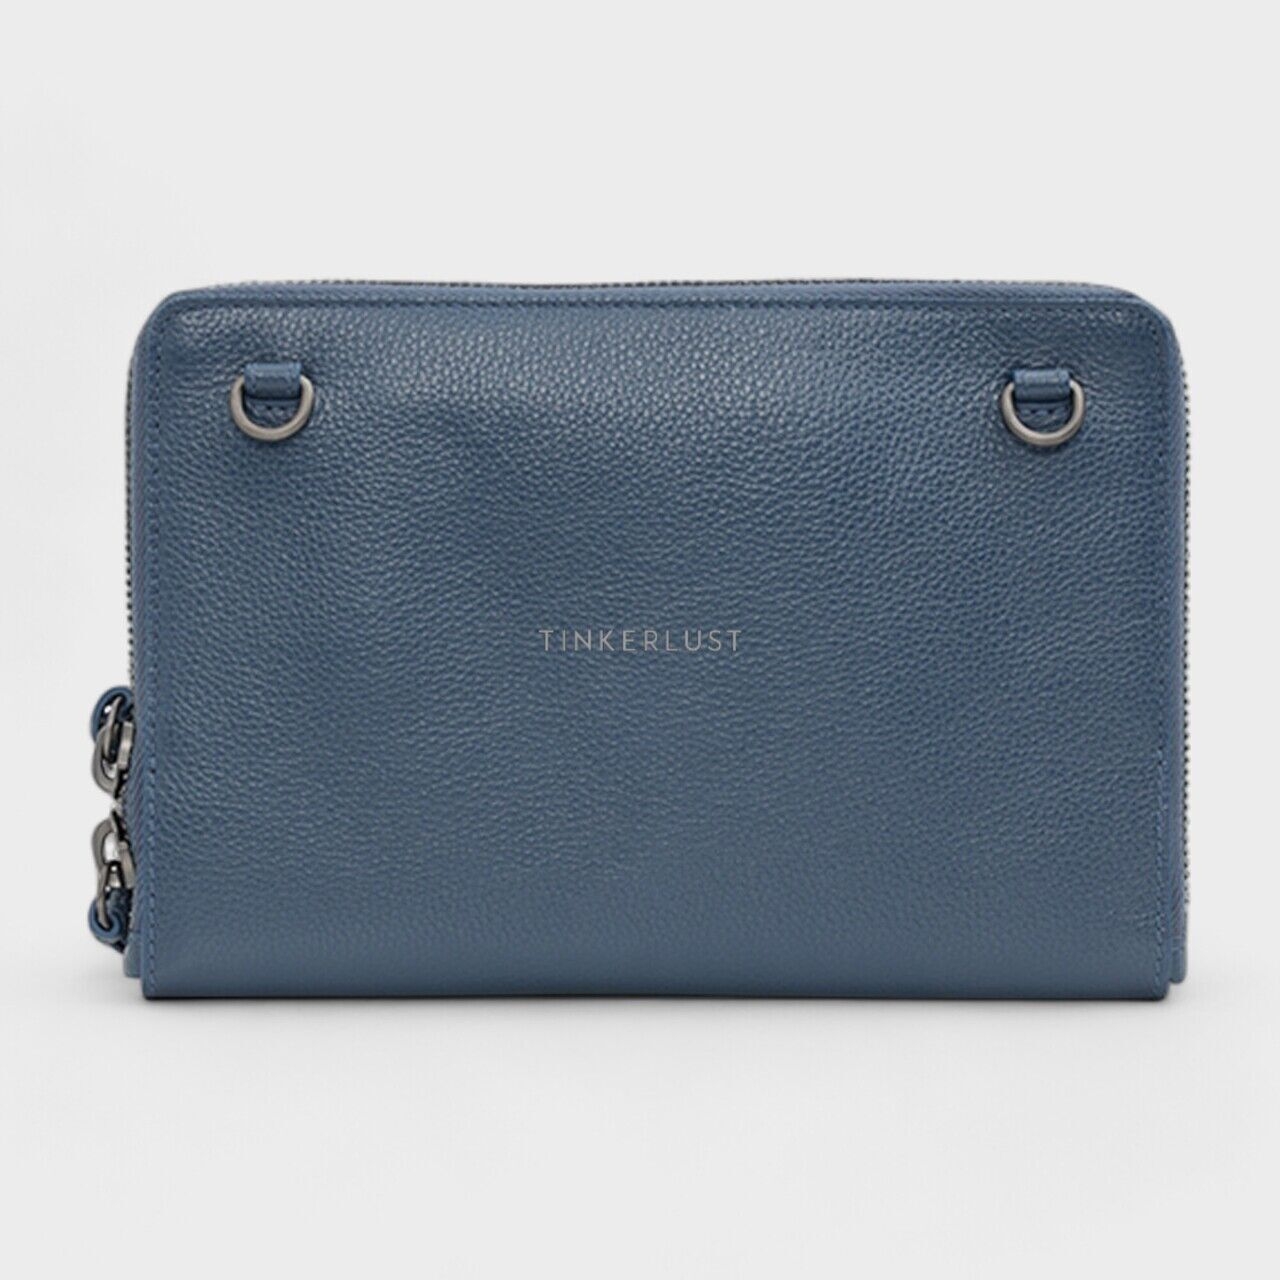 Balenciaga Neo Classic Zip Around Pouch in Petrol Blue Grained RHW with Strap Clutch